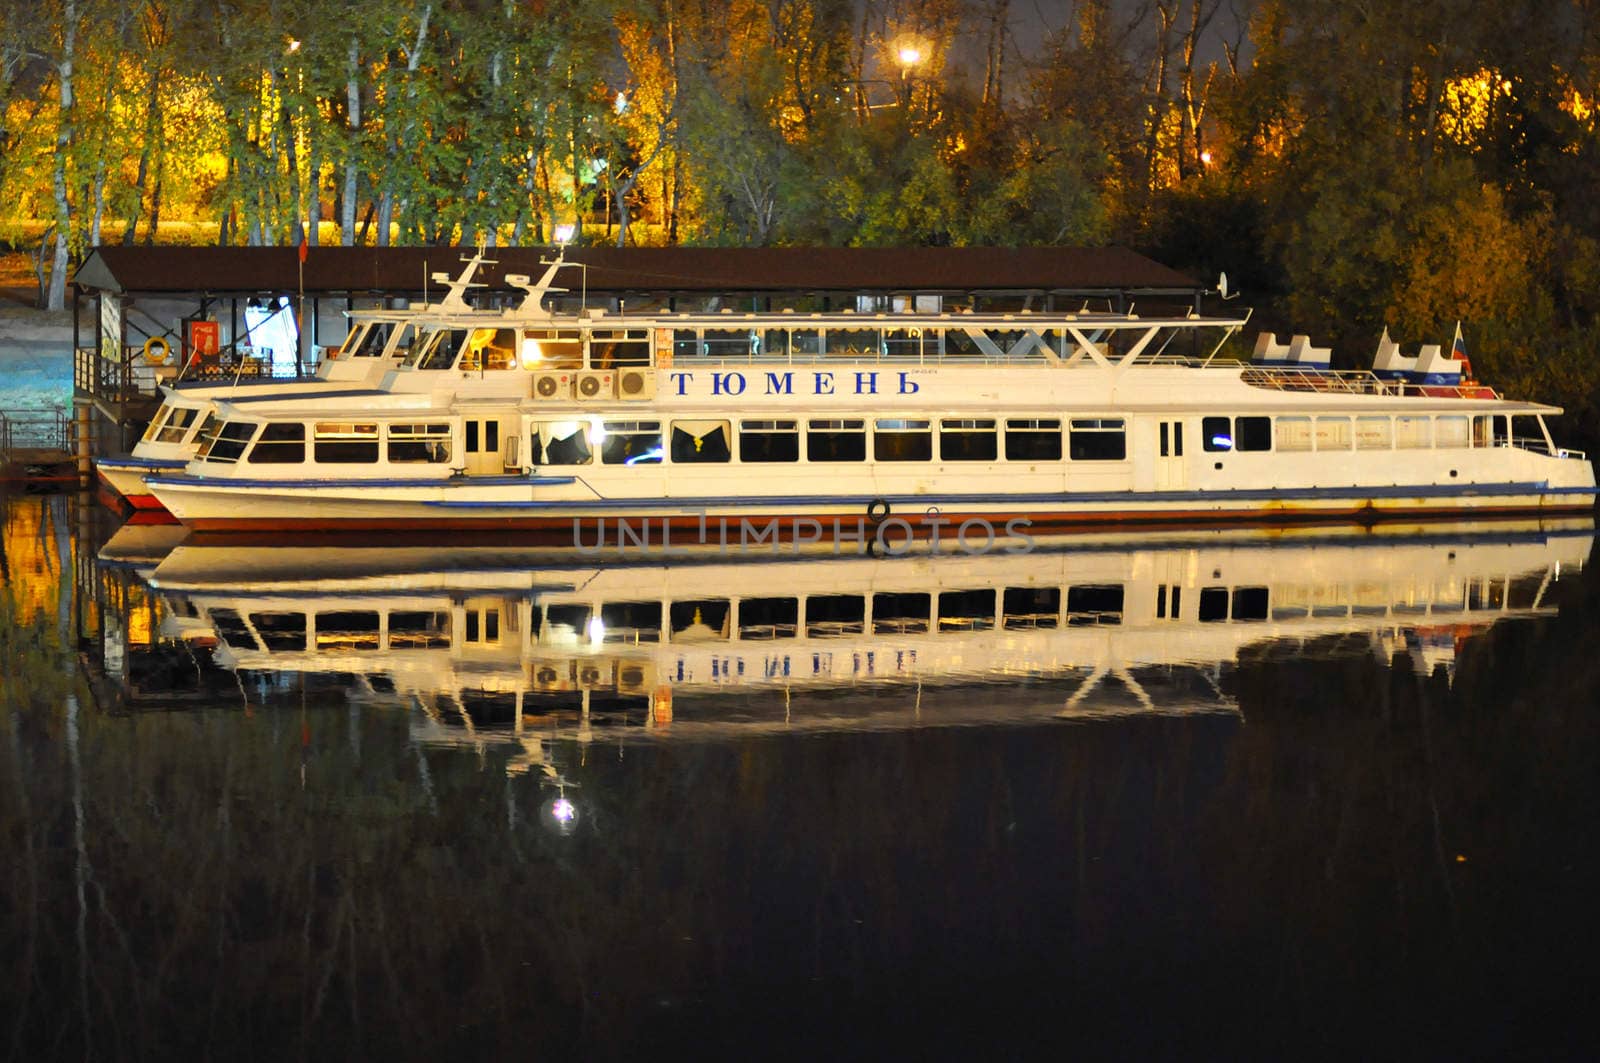 The boat "Tyumen" at the mooring on the Tura River in Tyumen at night, Russia.